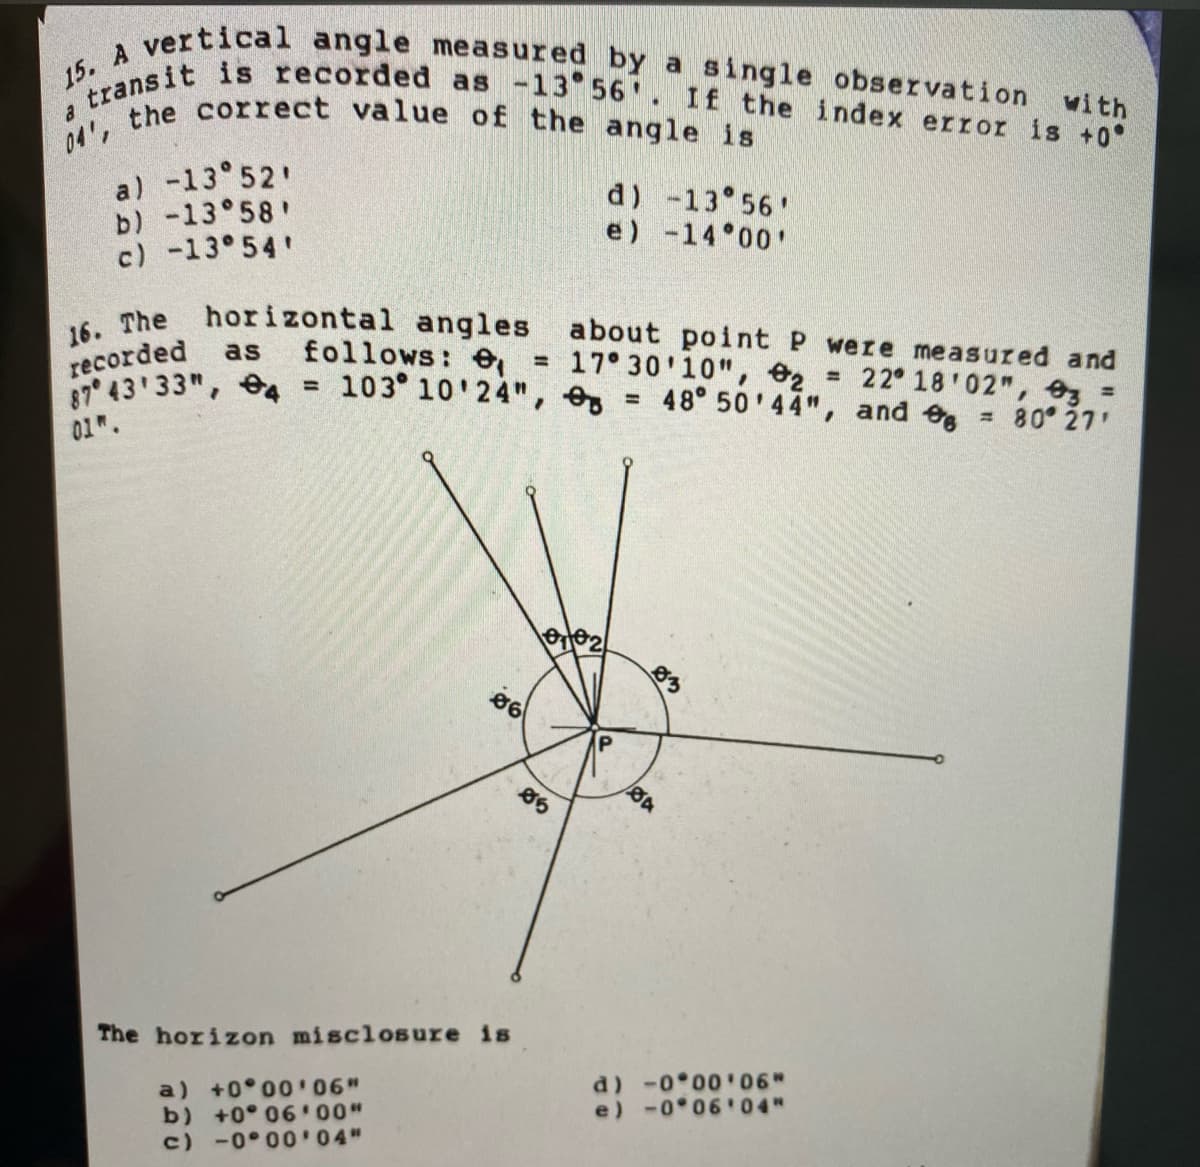 04', the correct value of the angle is
15. A vertical angle measured by a single observation with
ytransit is recorded as -13 56 . If the index error is +0
16. The horizontal angles about point P were measured and
a) -13 52'
b) -13°58
c) -13 54
d) -13 56'
e) -14 00'
recorded
87 43 33", 4
follows: e, =
= 103 10'24",
as
17 30'10", e2 = 22 18'02", 3 =
48° 50'44", and e
80 27
%D
01.
83
The horizon misclosure is
a) +0 0006"
b) +0° 06 00"
c) -0 00'04"
d) -0 00 06"
e) -0 06'04"
P.
